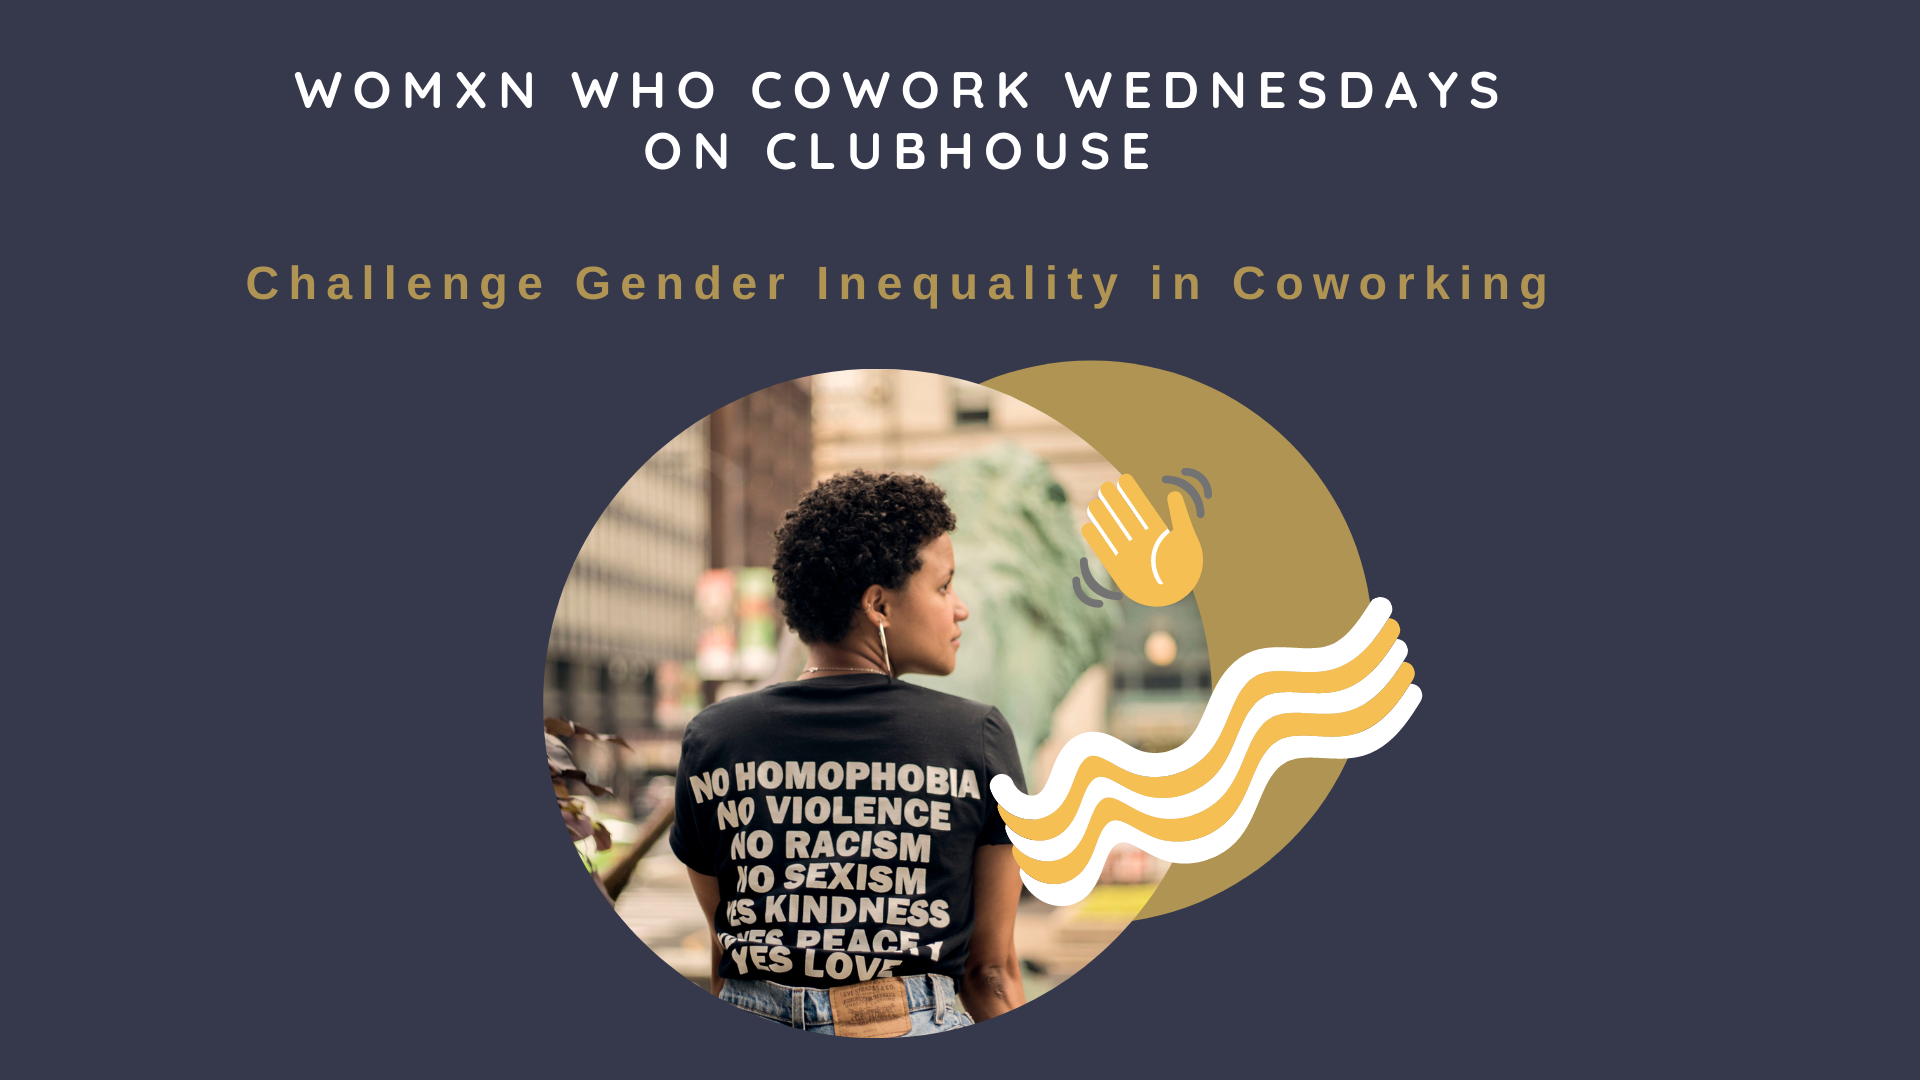 Image with a Black woman who is wearing a Tshirt on and has her back to camera, looking sideways. Tshirt reads: No Homophobia, No Violence, No Racism, No Sexism, and the rest of the message is obscured. The text on the image says Womxn Who Cowork Wednesdays on Clubhouse, challenge gender inequality